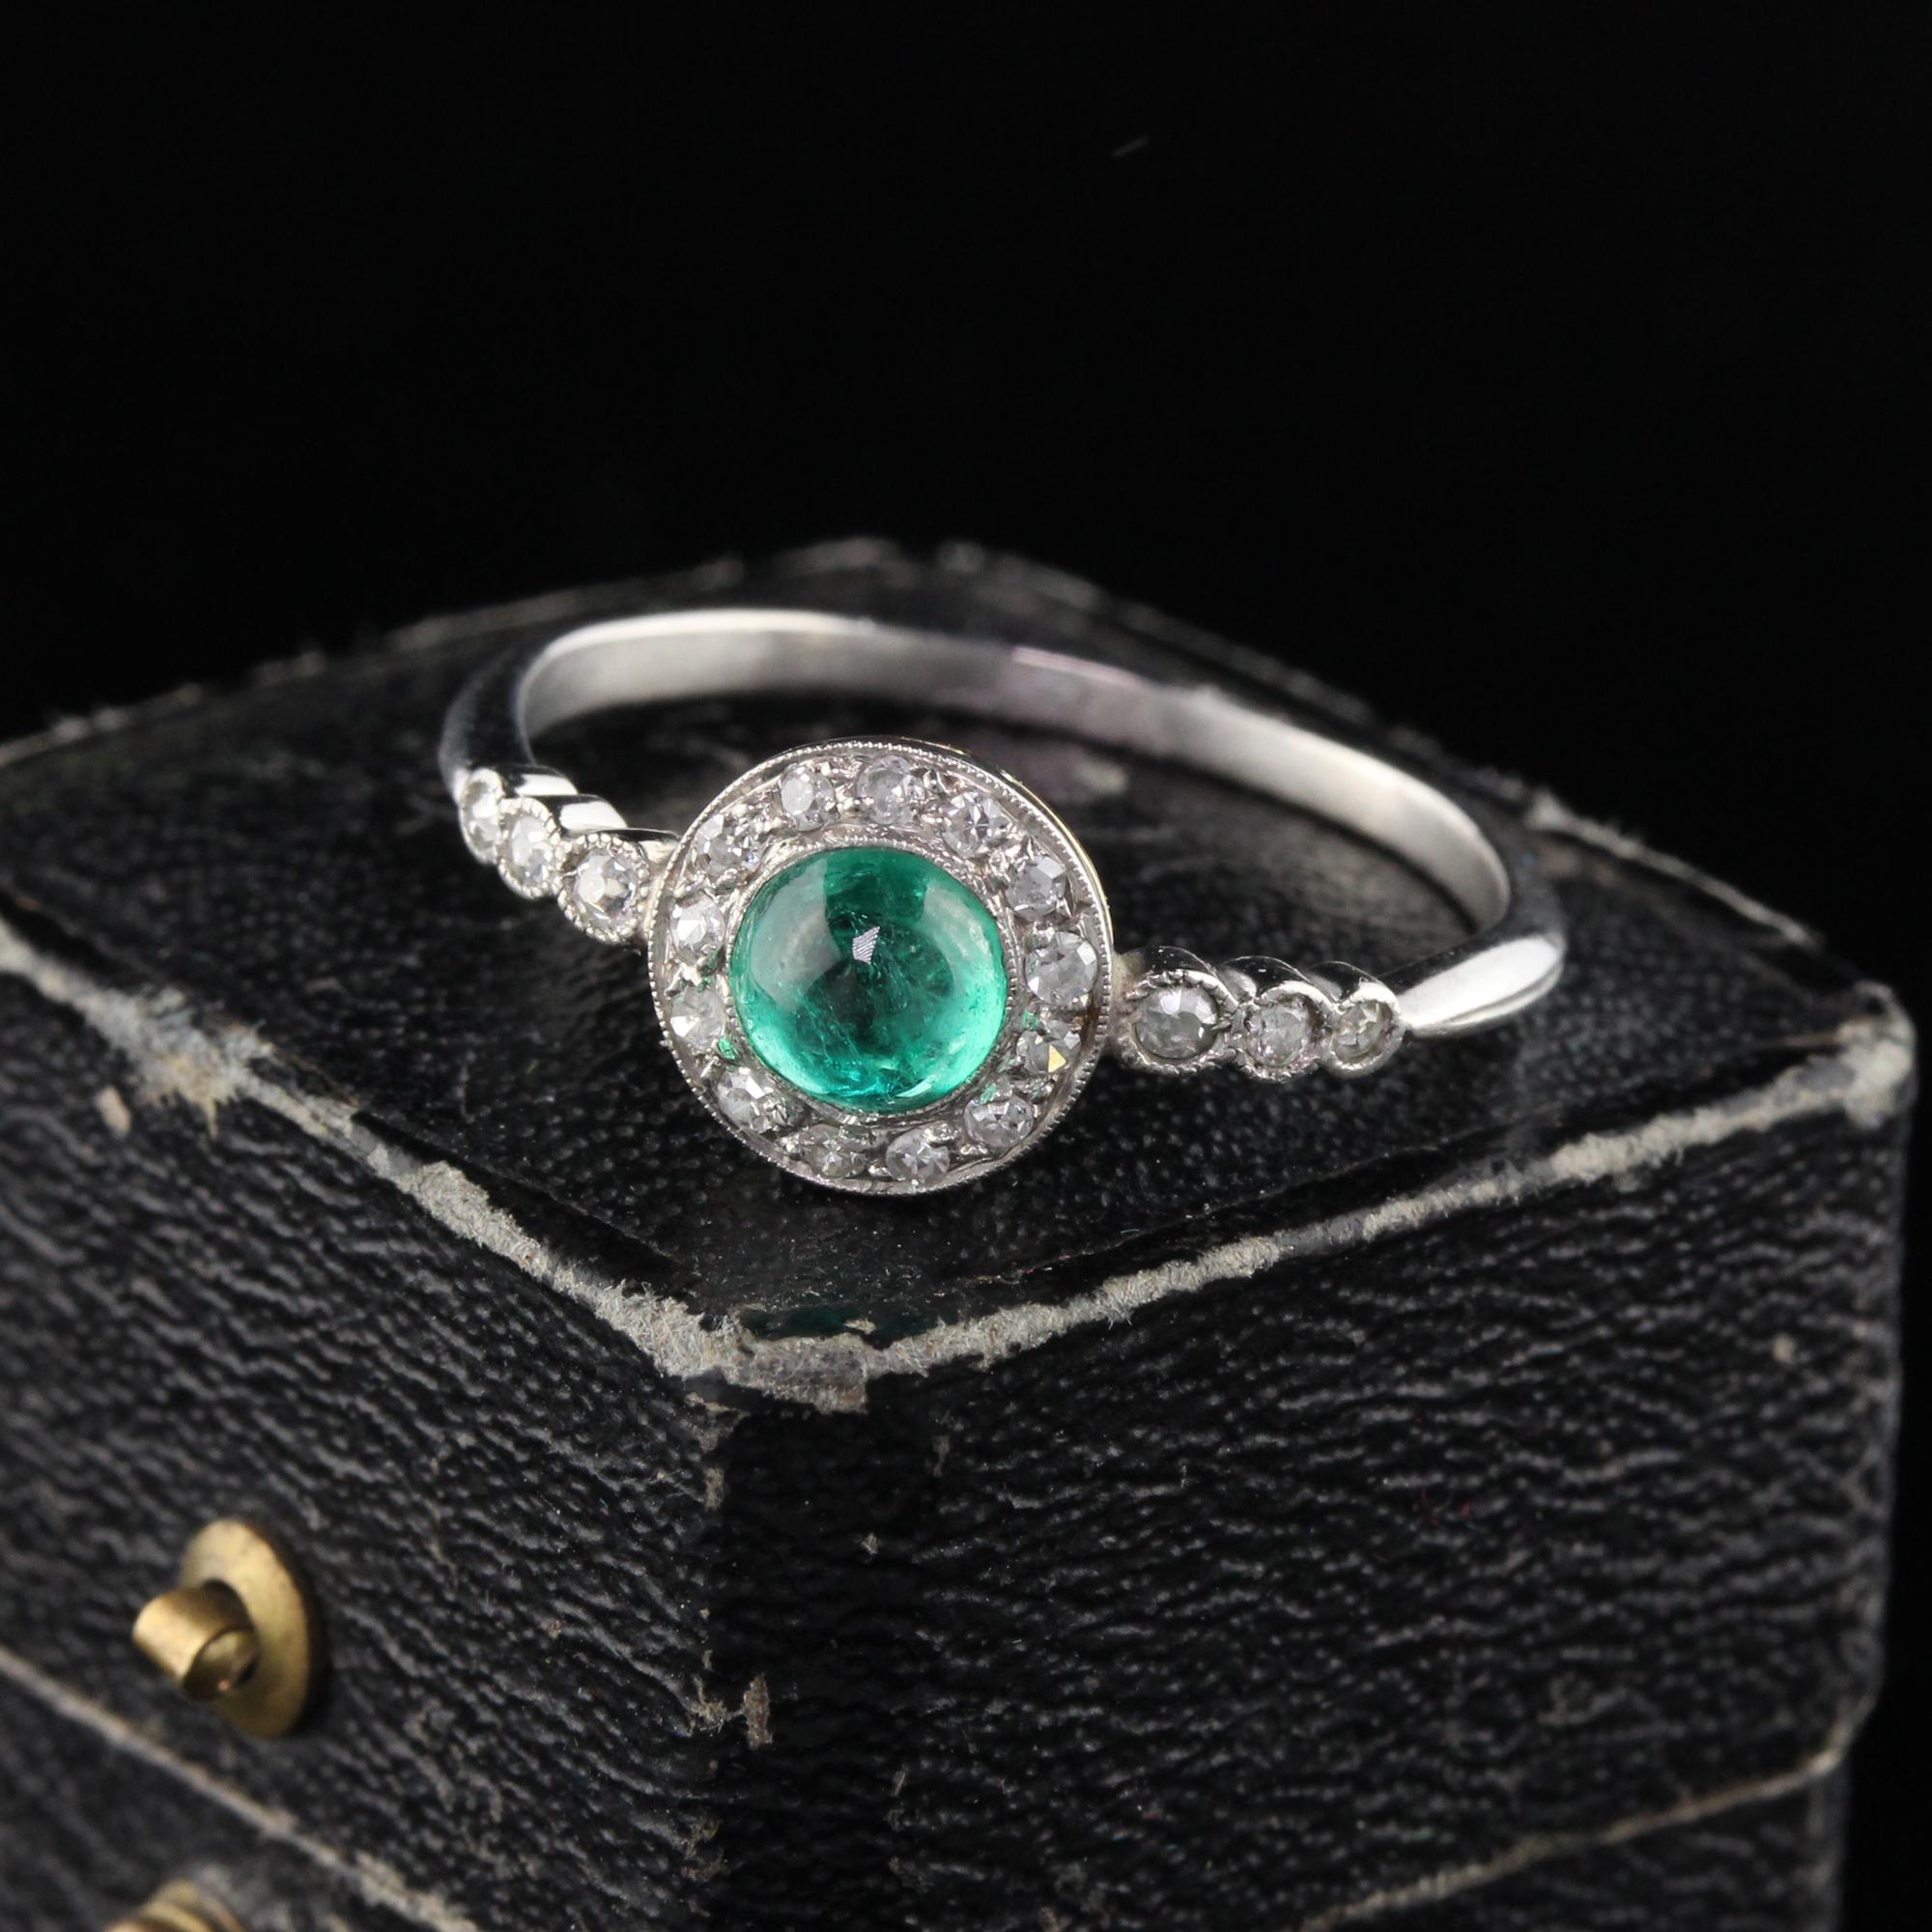 Simply beautiful French Edwardian Engagement Ring featuring a cabochon emerald surrounded by a thin halo of diamonds and 3 stones on either side. Dainty and elegant. Sits very low to the finger.

#R0272

Metal: Platinum

Weight: 2.4 Grams

Center